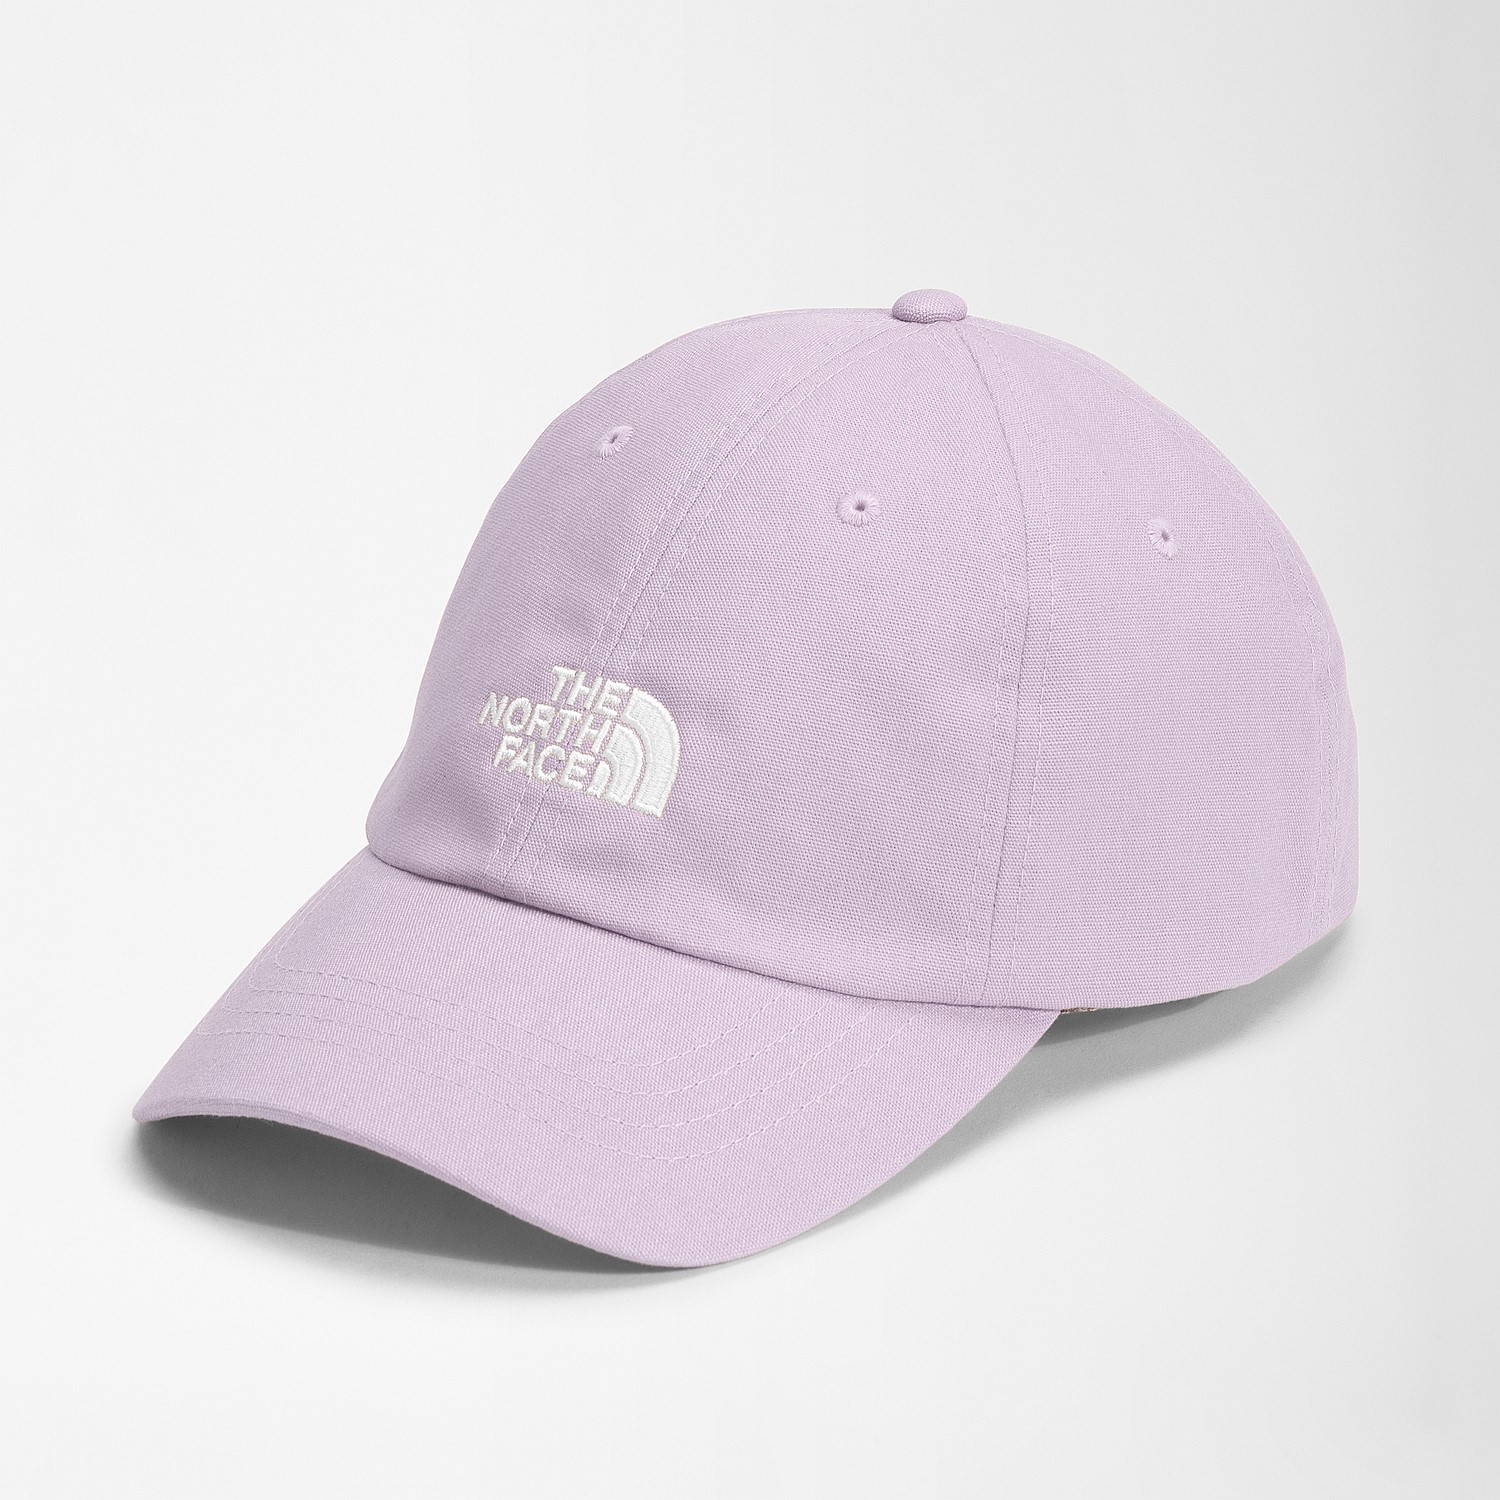 Norm Hat | Caps & Hats | Stirling Sports